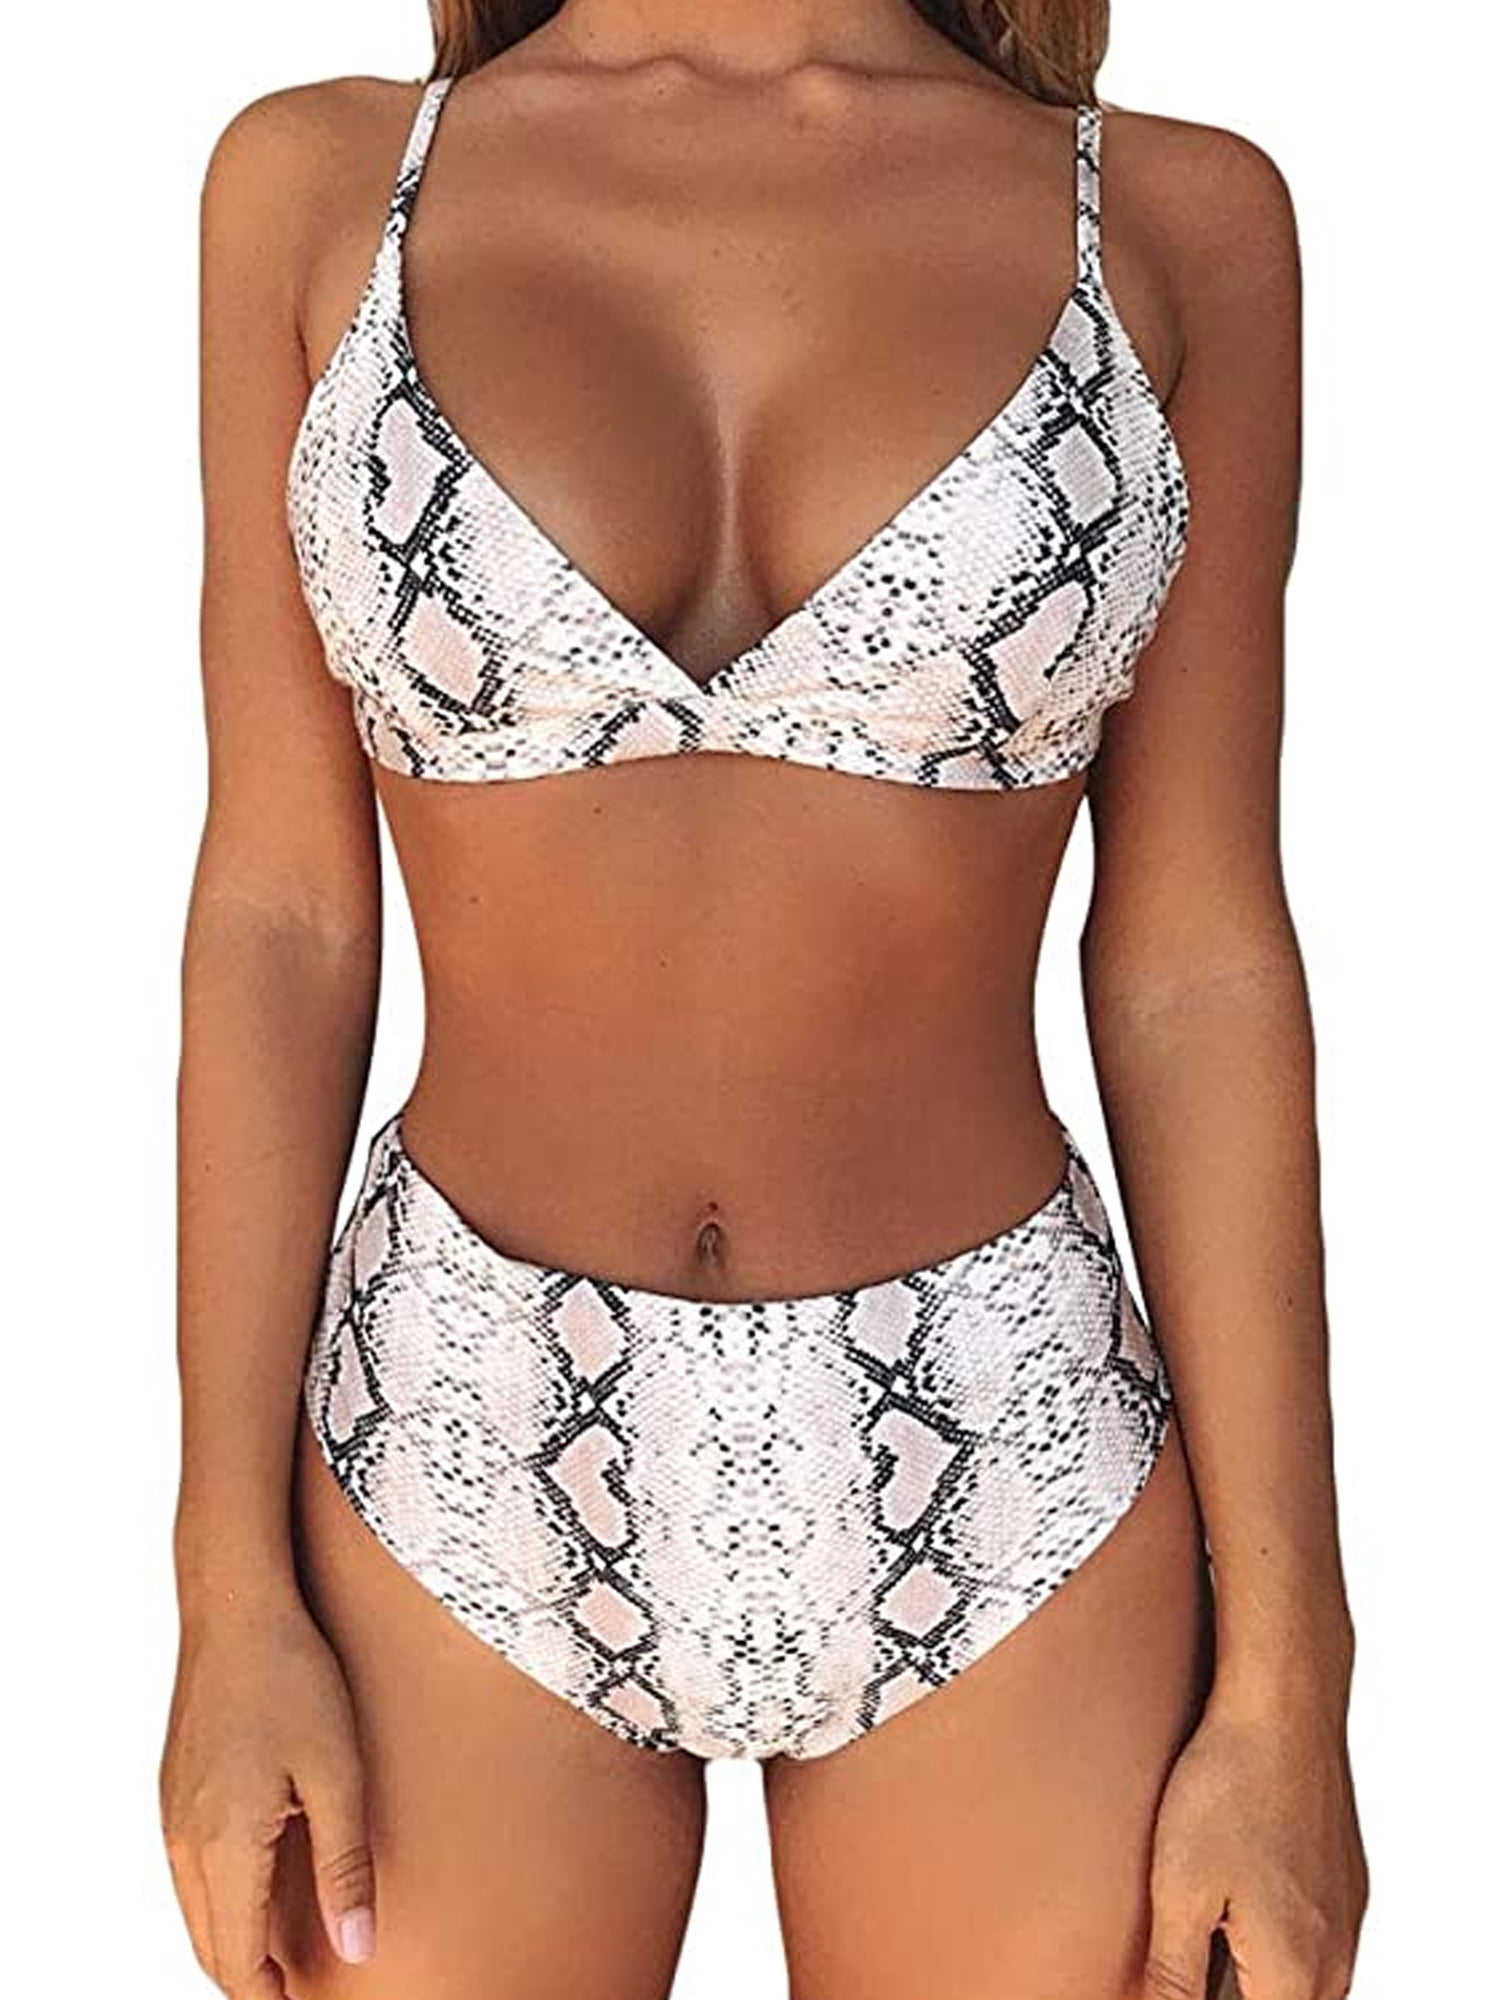 Women High Waisted Two Piece Swimsuit Snakeskin Leopard Floral Printed Bikini Set Bathing Suit